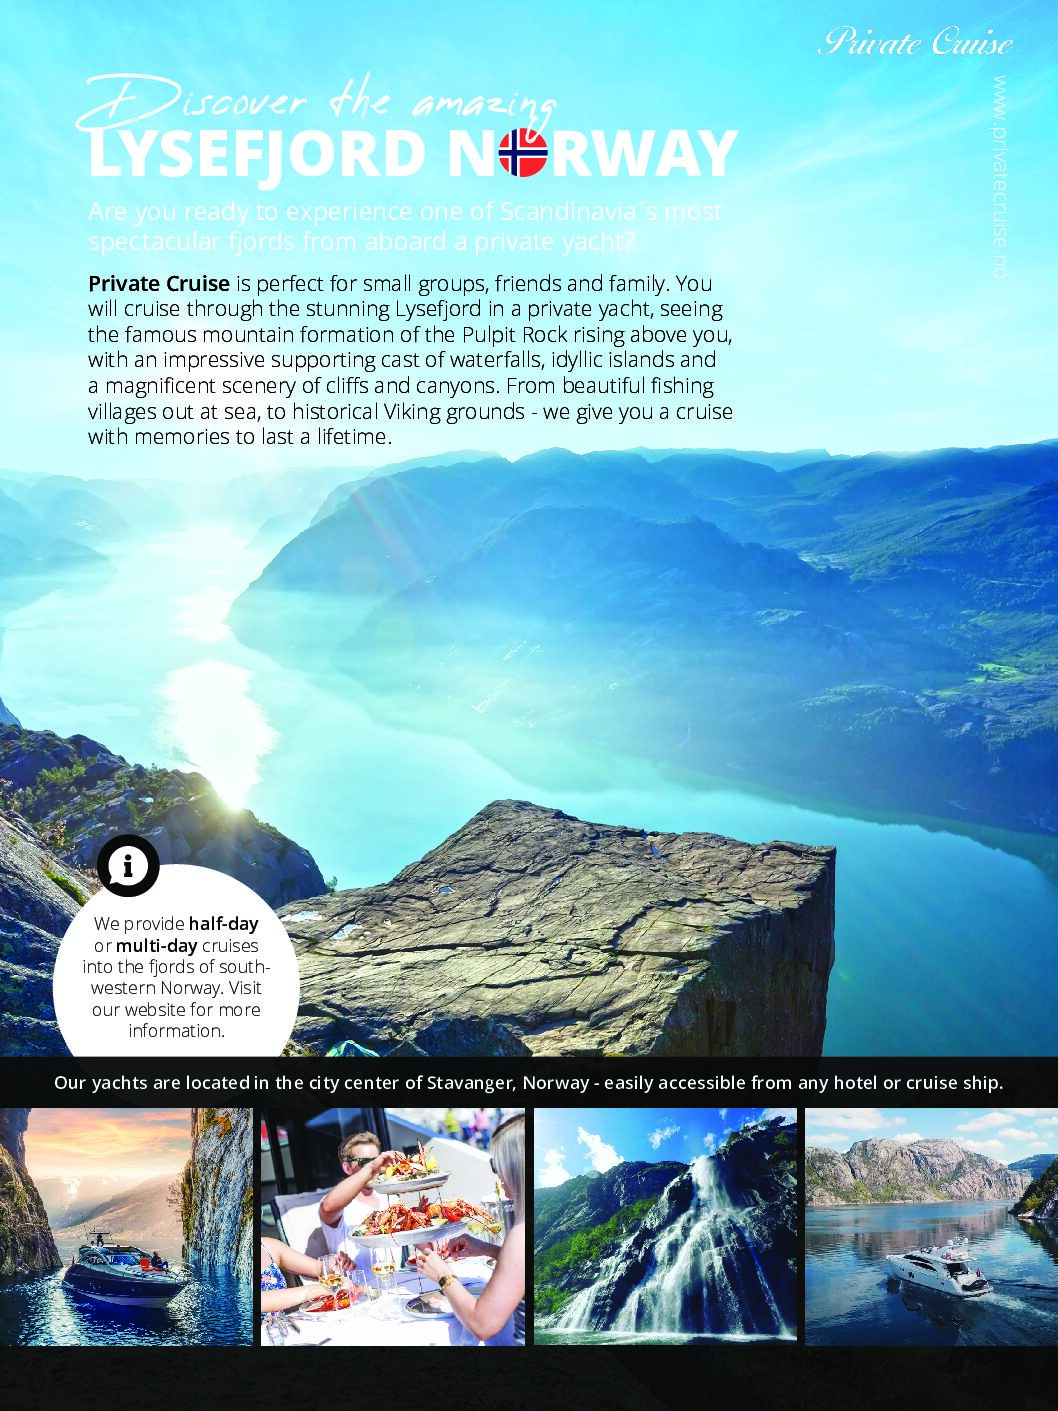 Private Cruise - Fjord Cruises Norway - Annonse Luxury Report v1 pdf